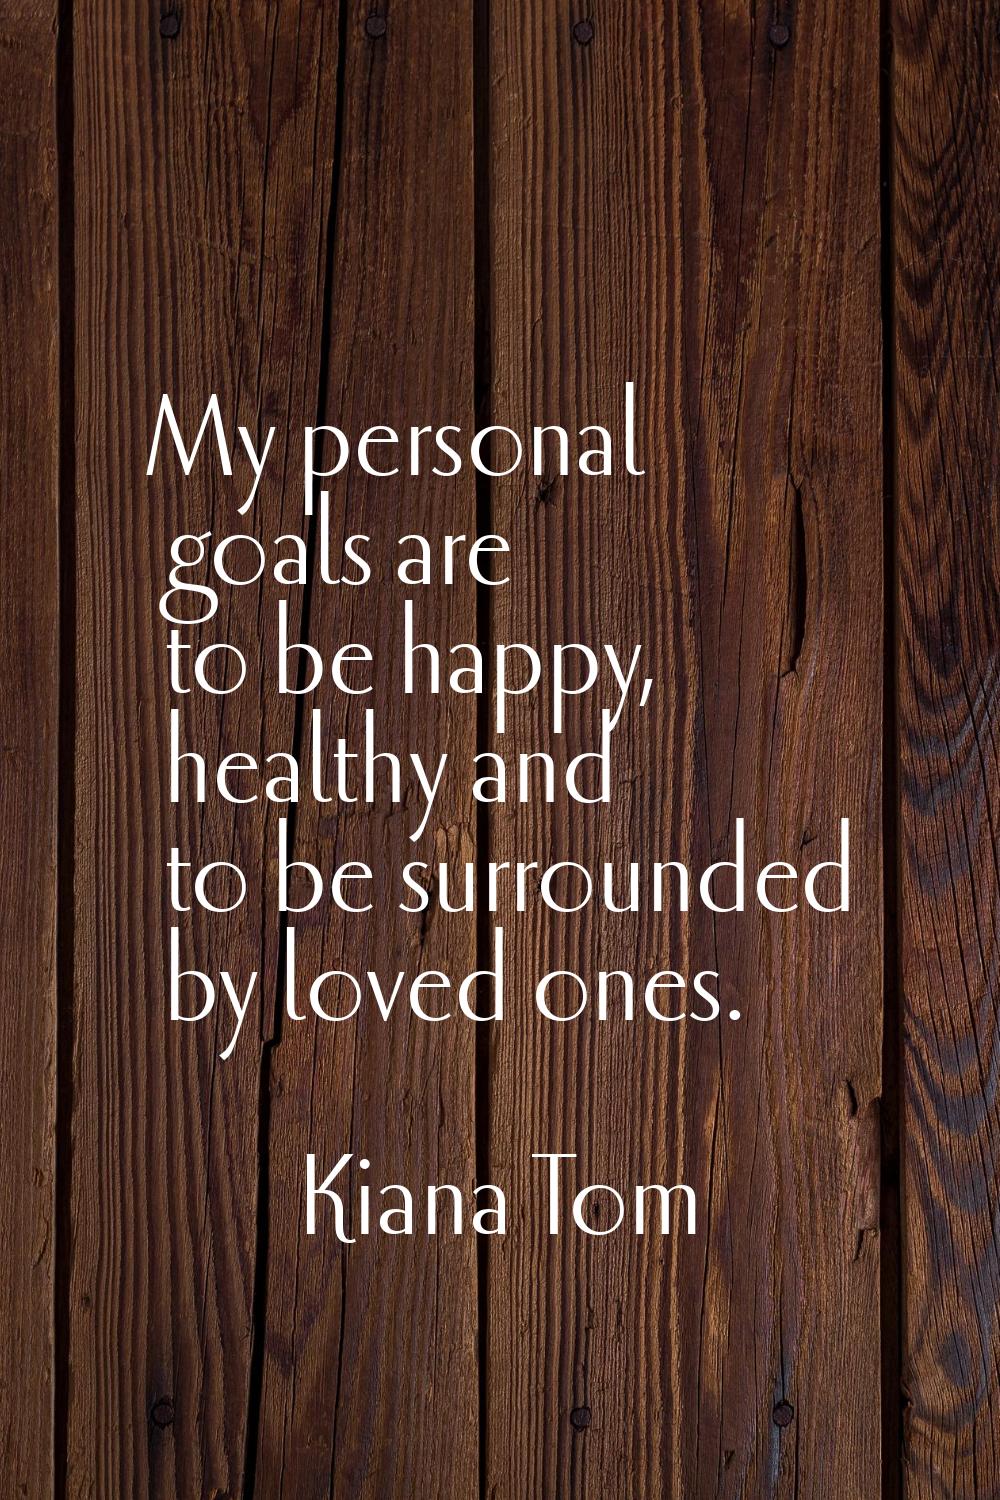 My personal goals are to be happy, healthy and to be surrounded by loved ones.